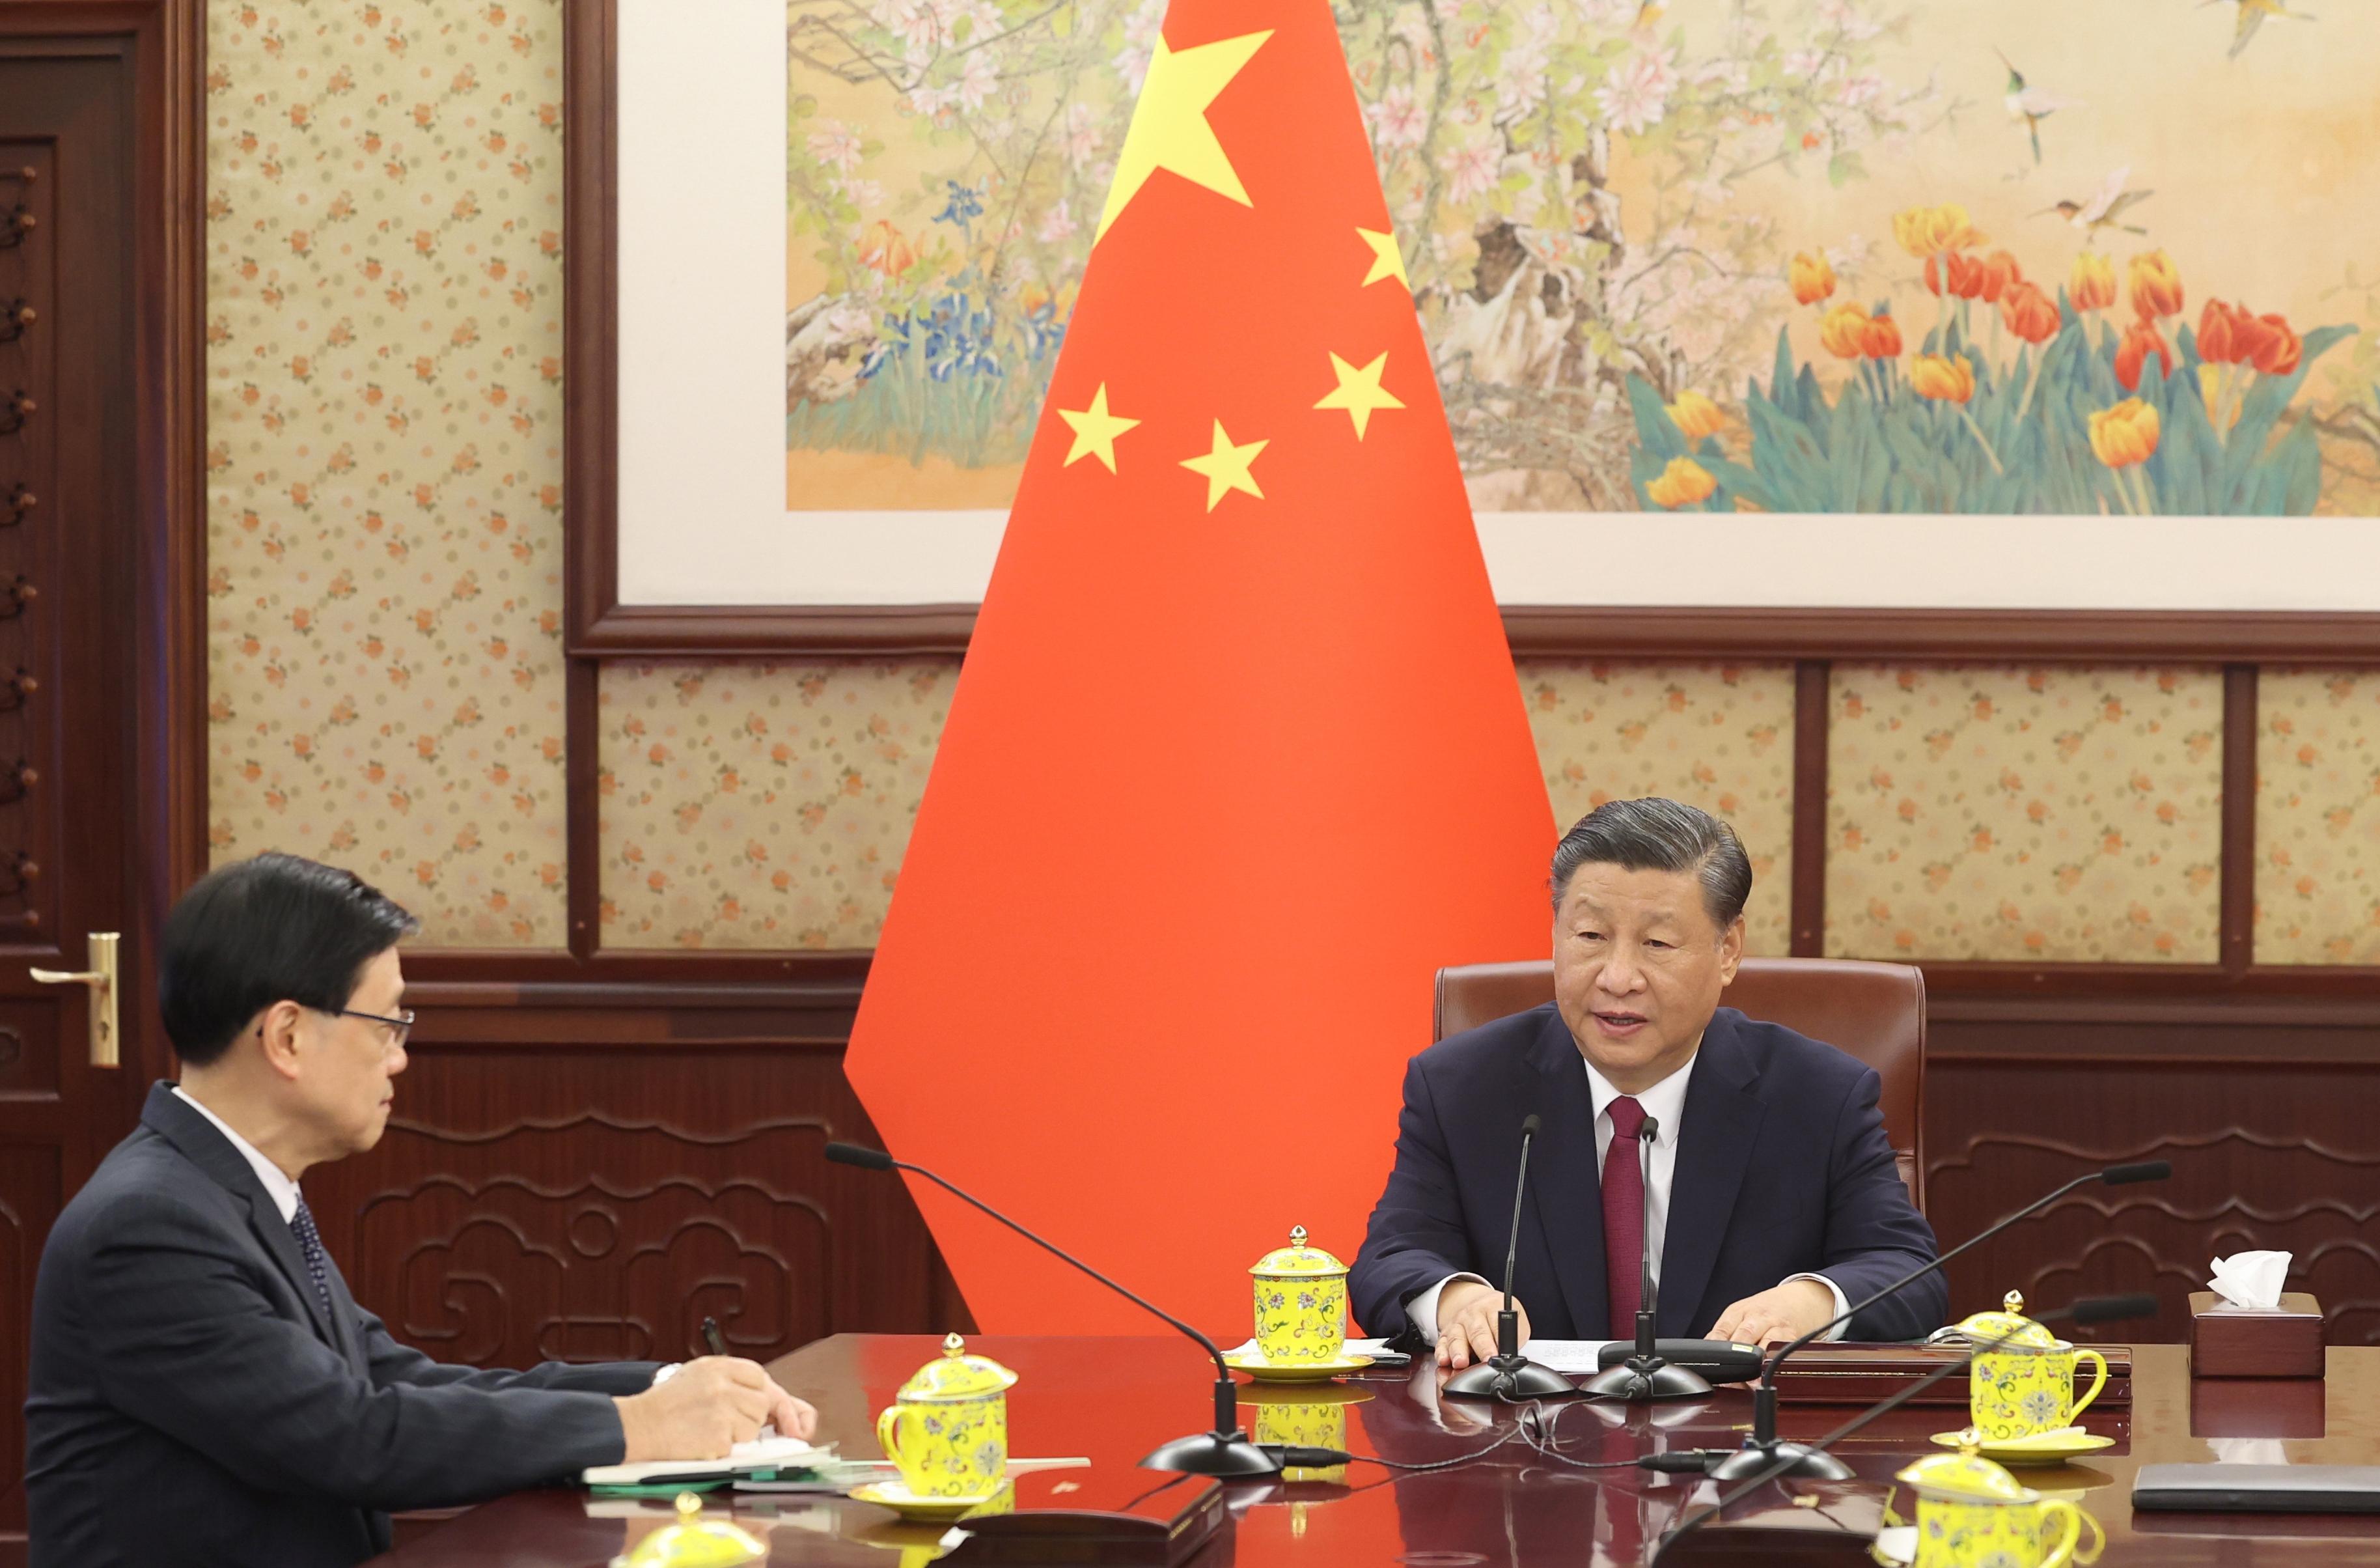 The Chief Executive, Mr John Lee (left), briefs President Xi Jinping (right) in Beijing today (December 18) on the latest economic, social and political situation in Hong Kong.